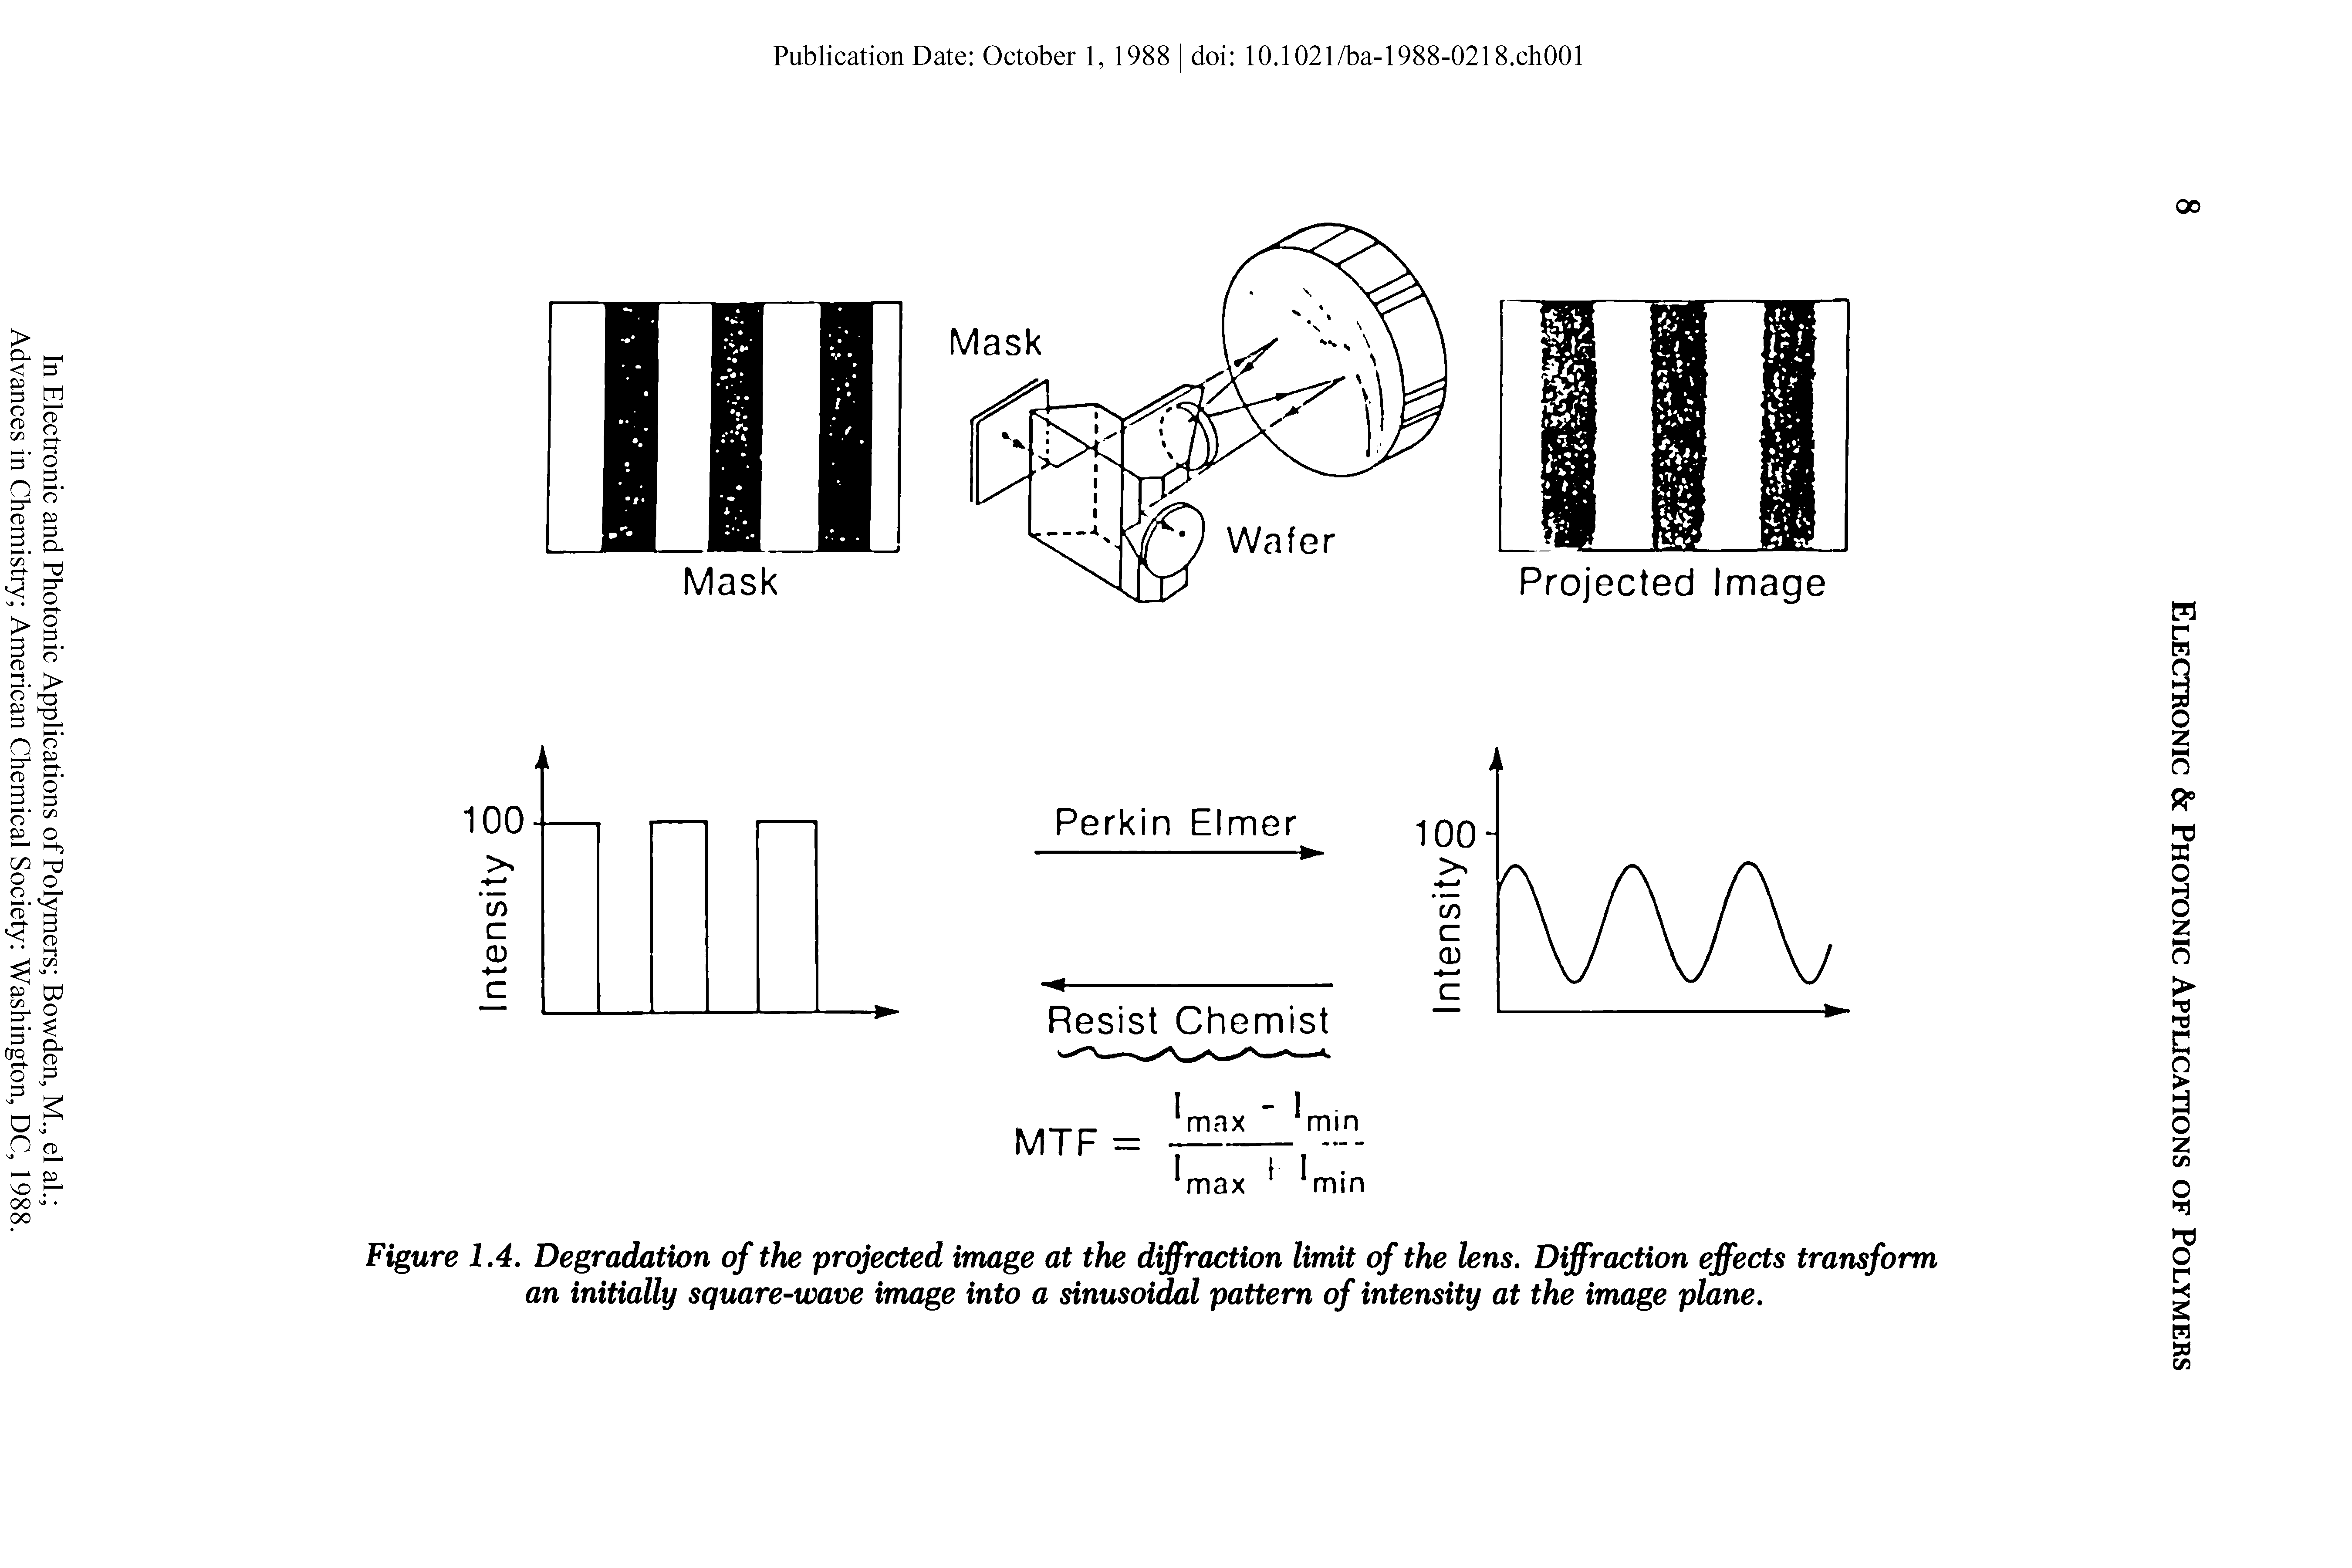 Figure 1.4. Degradation of the projected image at the diffraction limit of the lens. Diffraction effects transform an initially square-wave image into a sinusoidal pattern of intensity at the image plane.